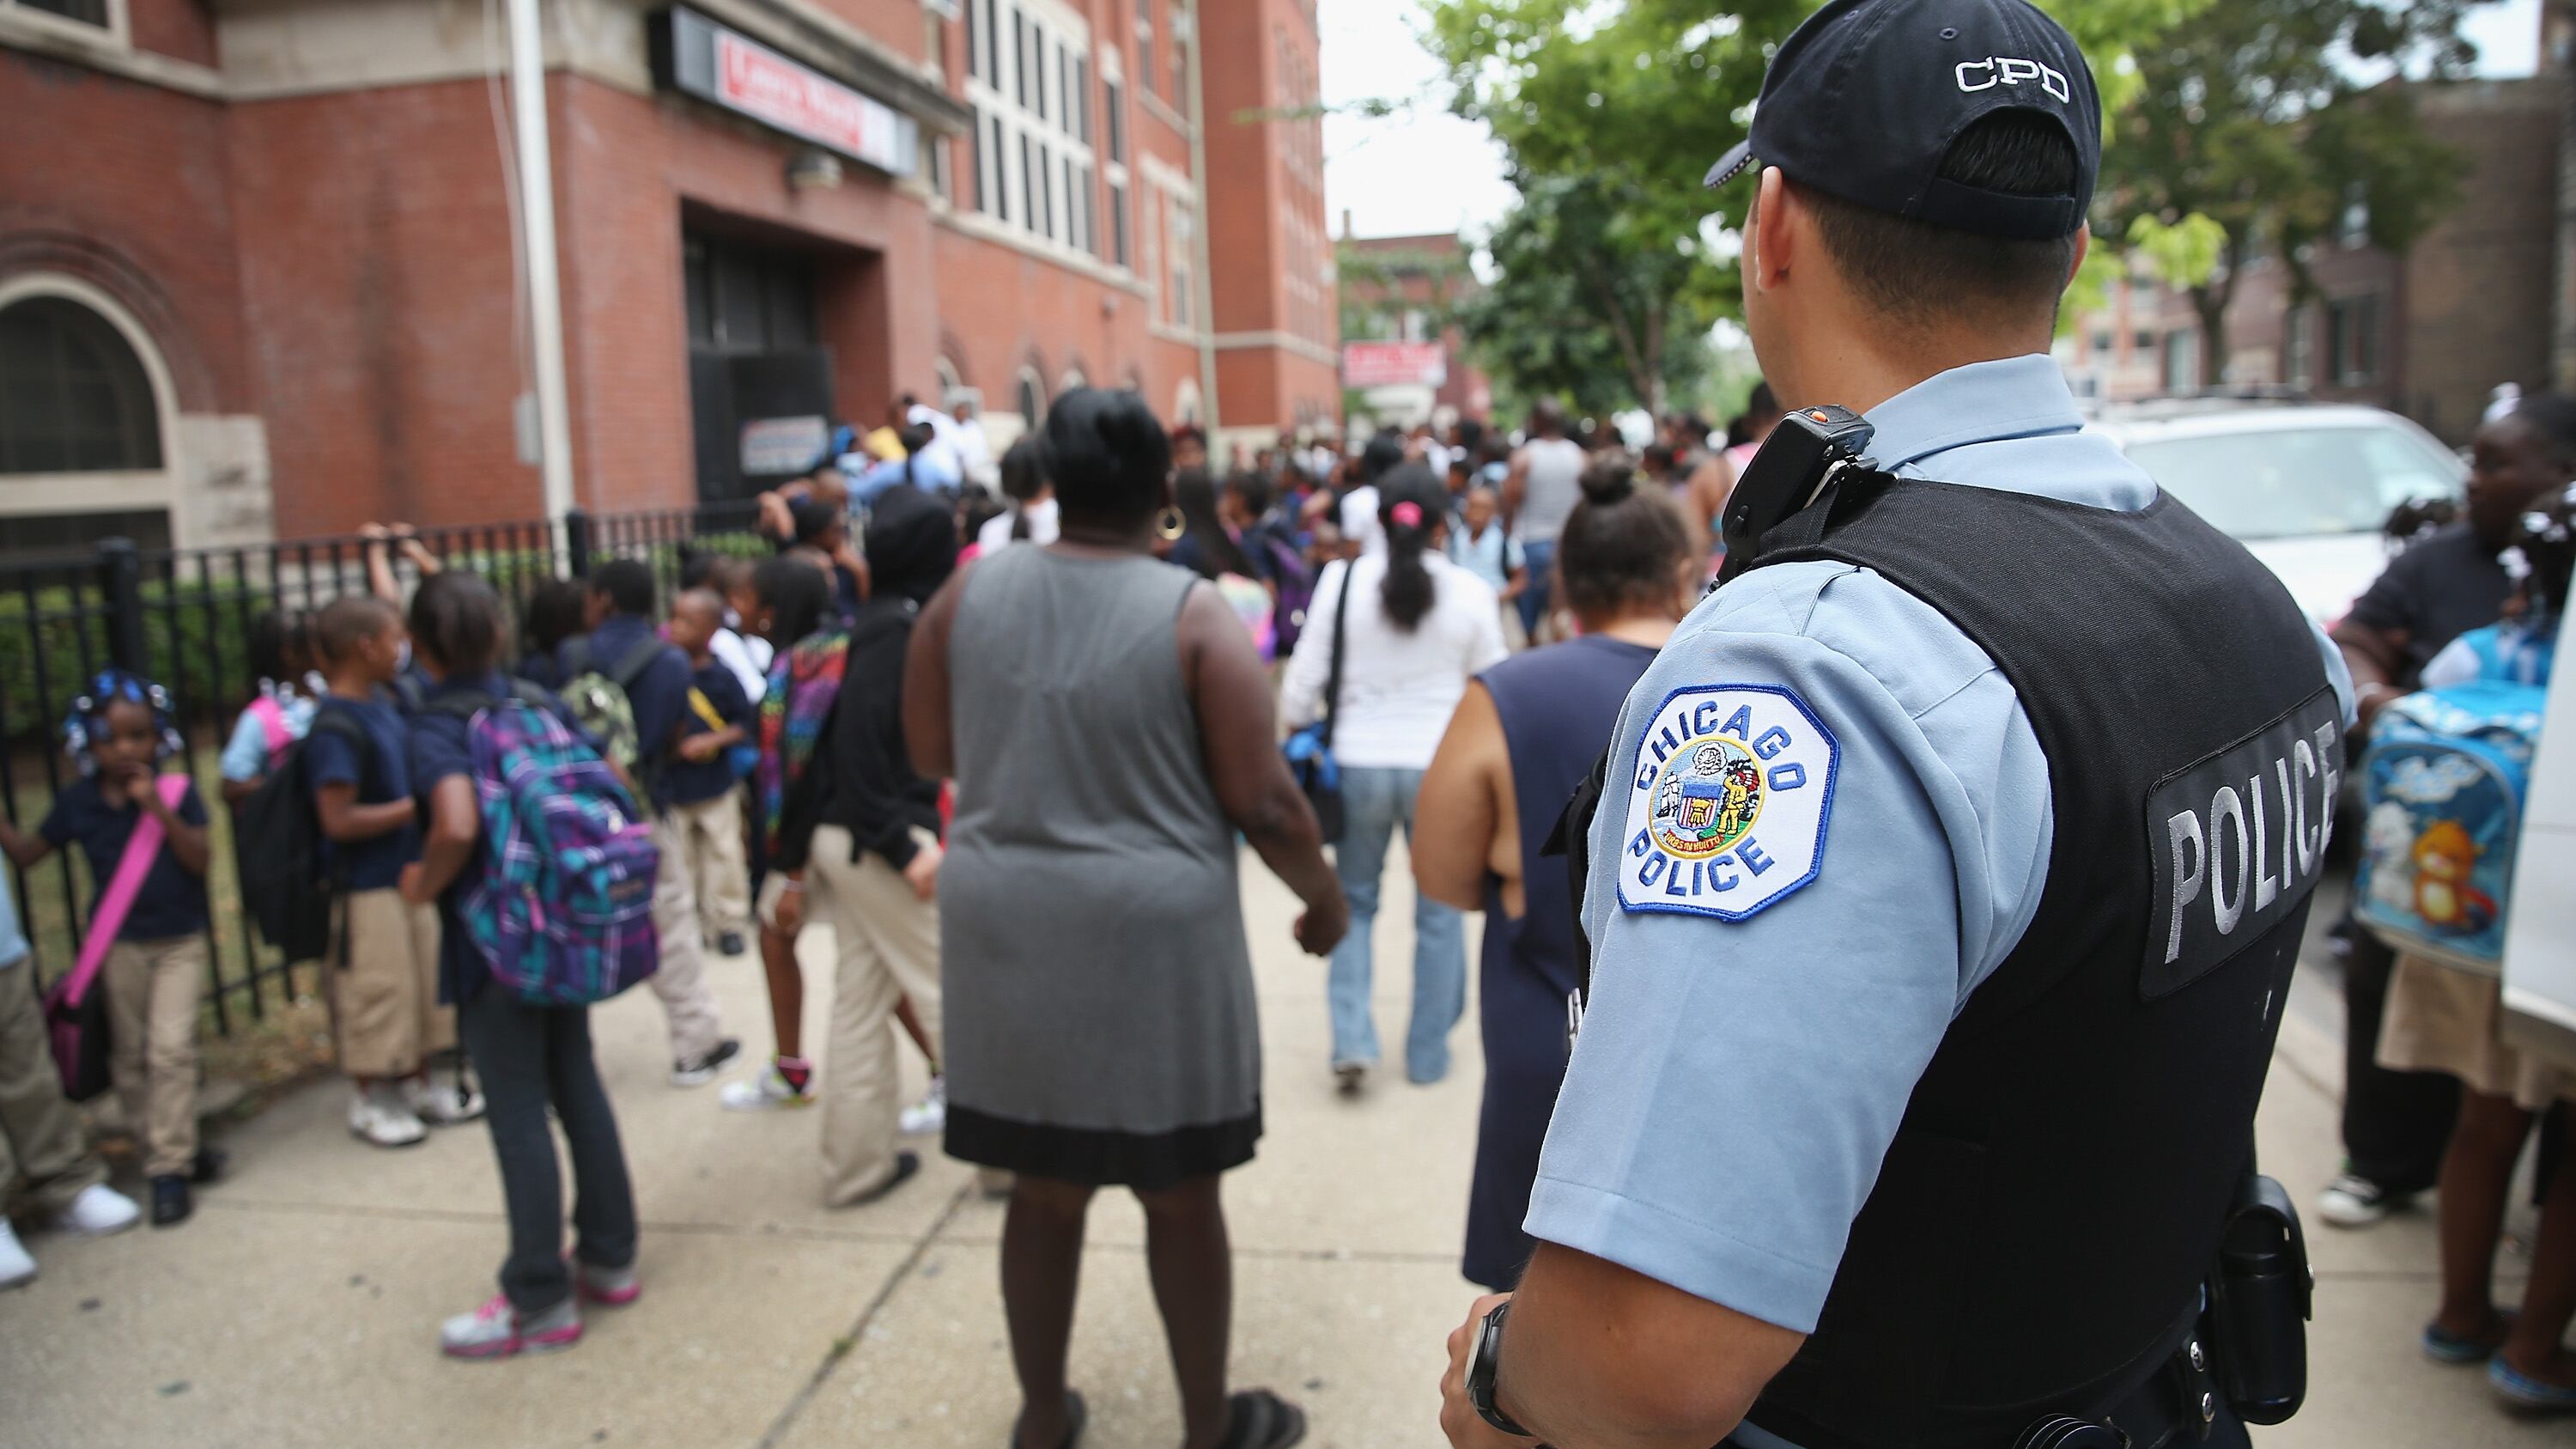 A police officer stands outside a school as students walk along the sidewalk.